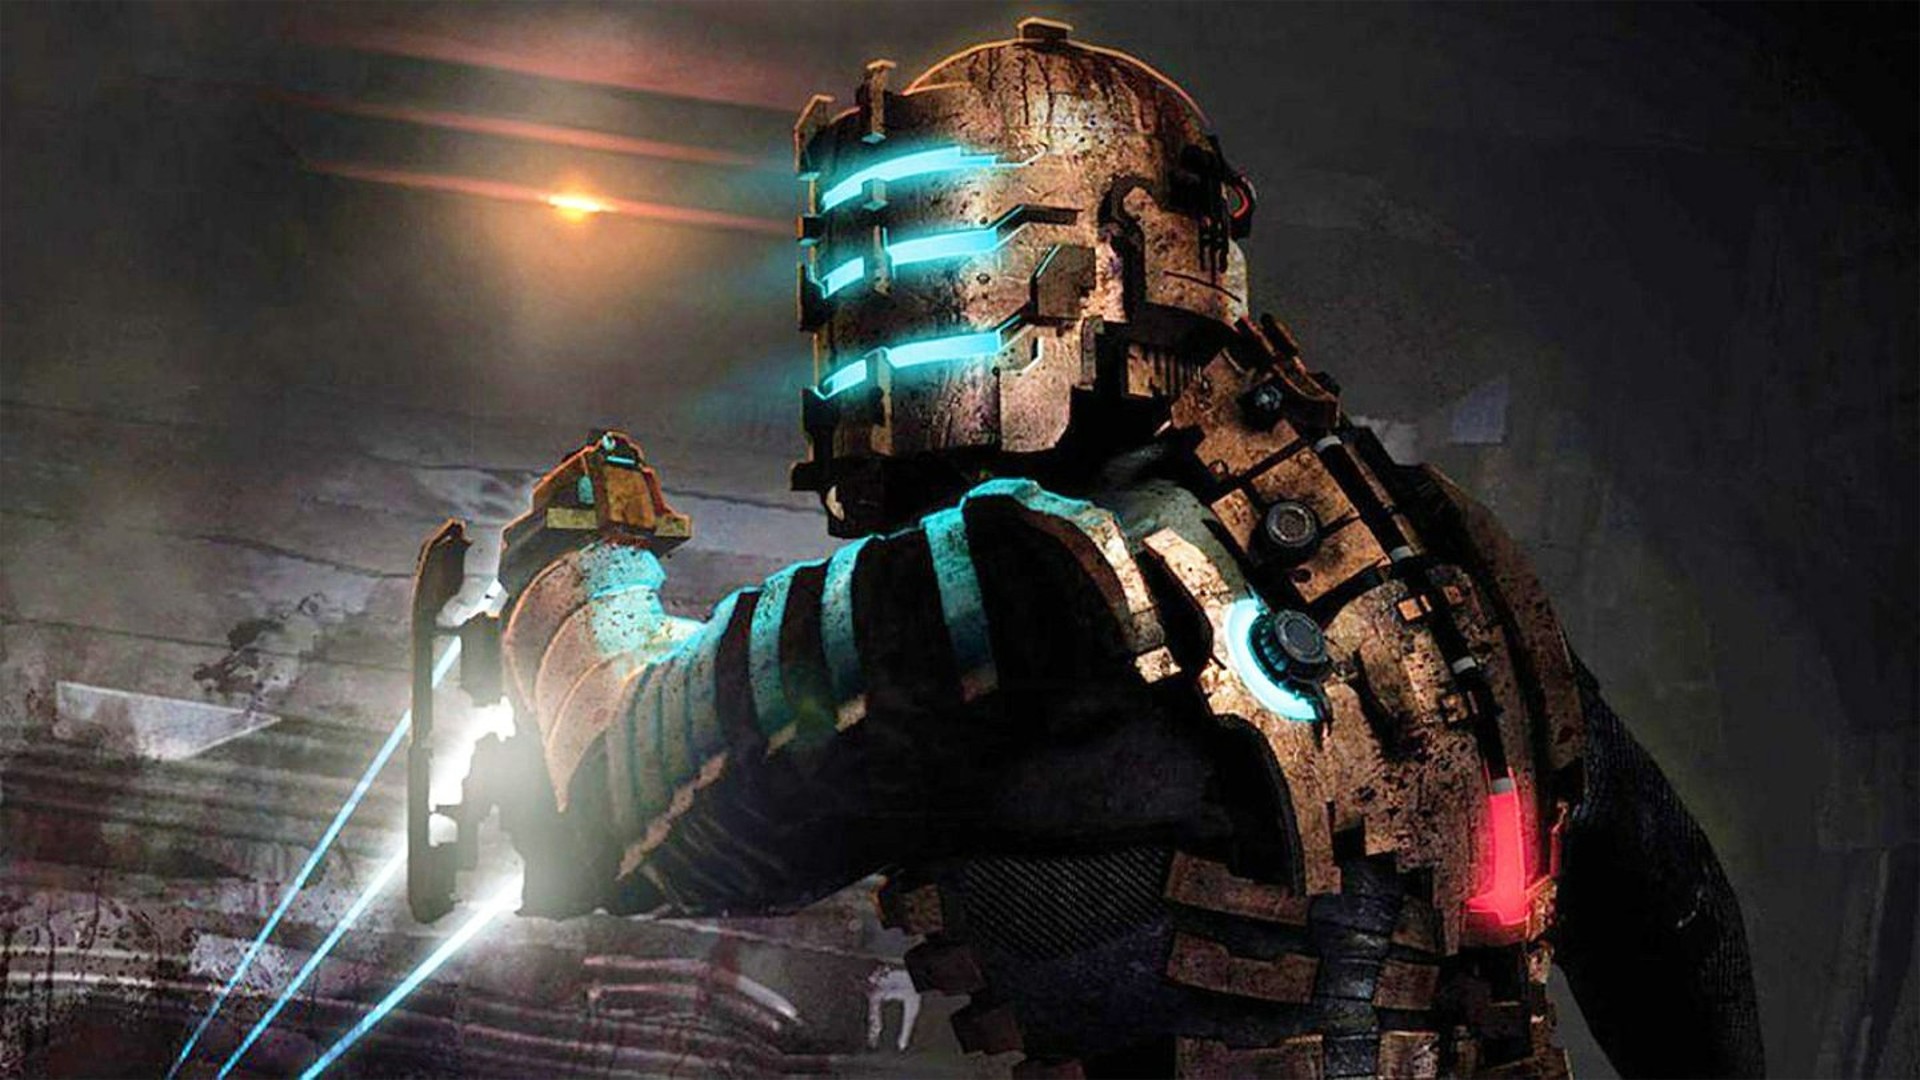 Hallowed Be Thy Game: Dead Space is a Brutal Gorefest in the